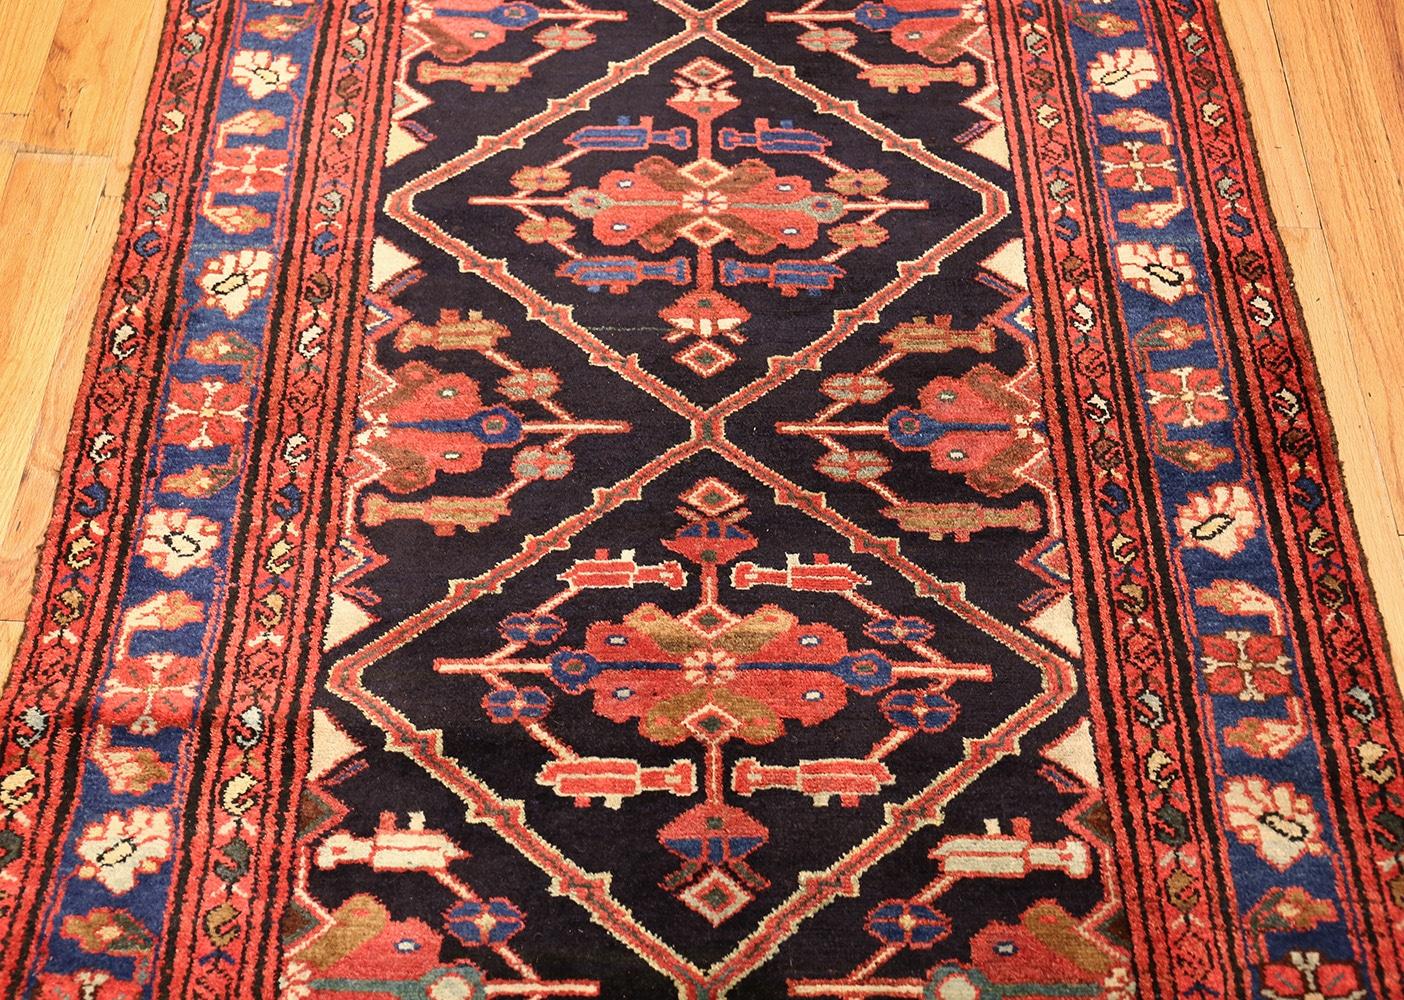 20th Century Antique Persian Malayer Runner Rug. 3' 4